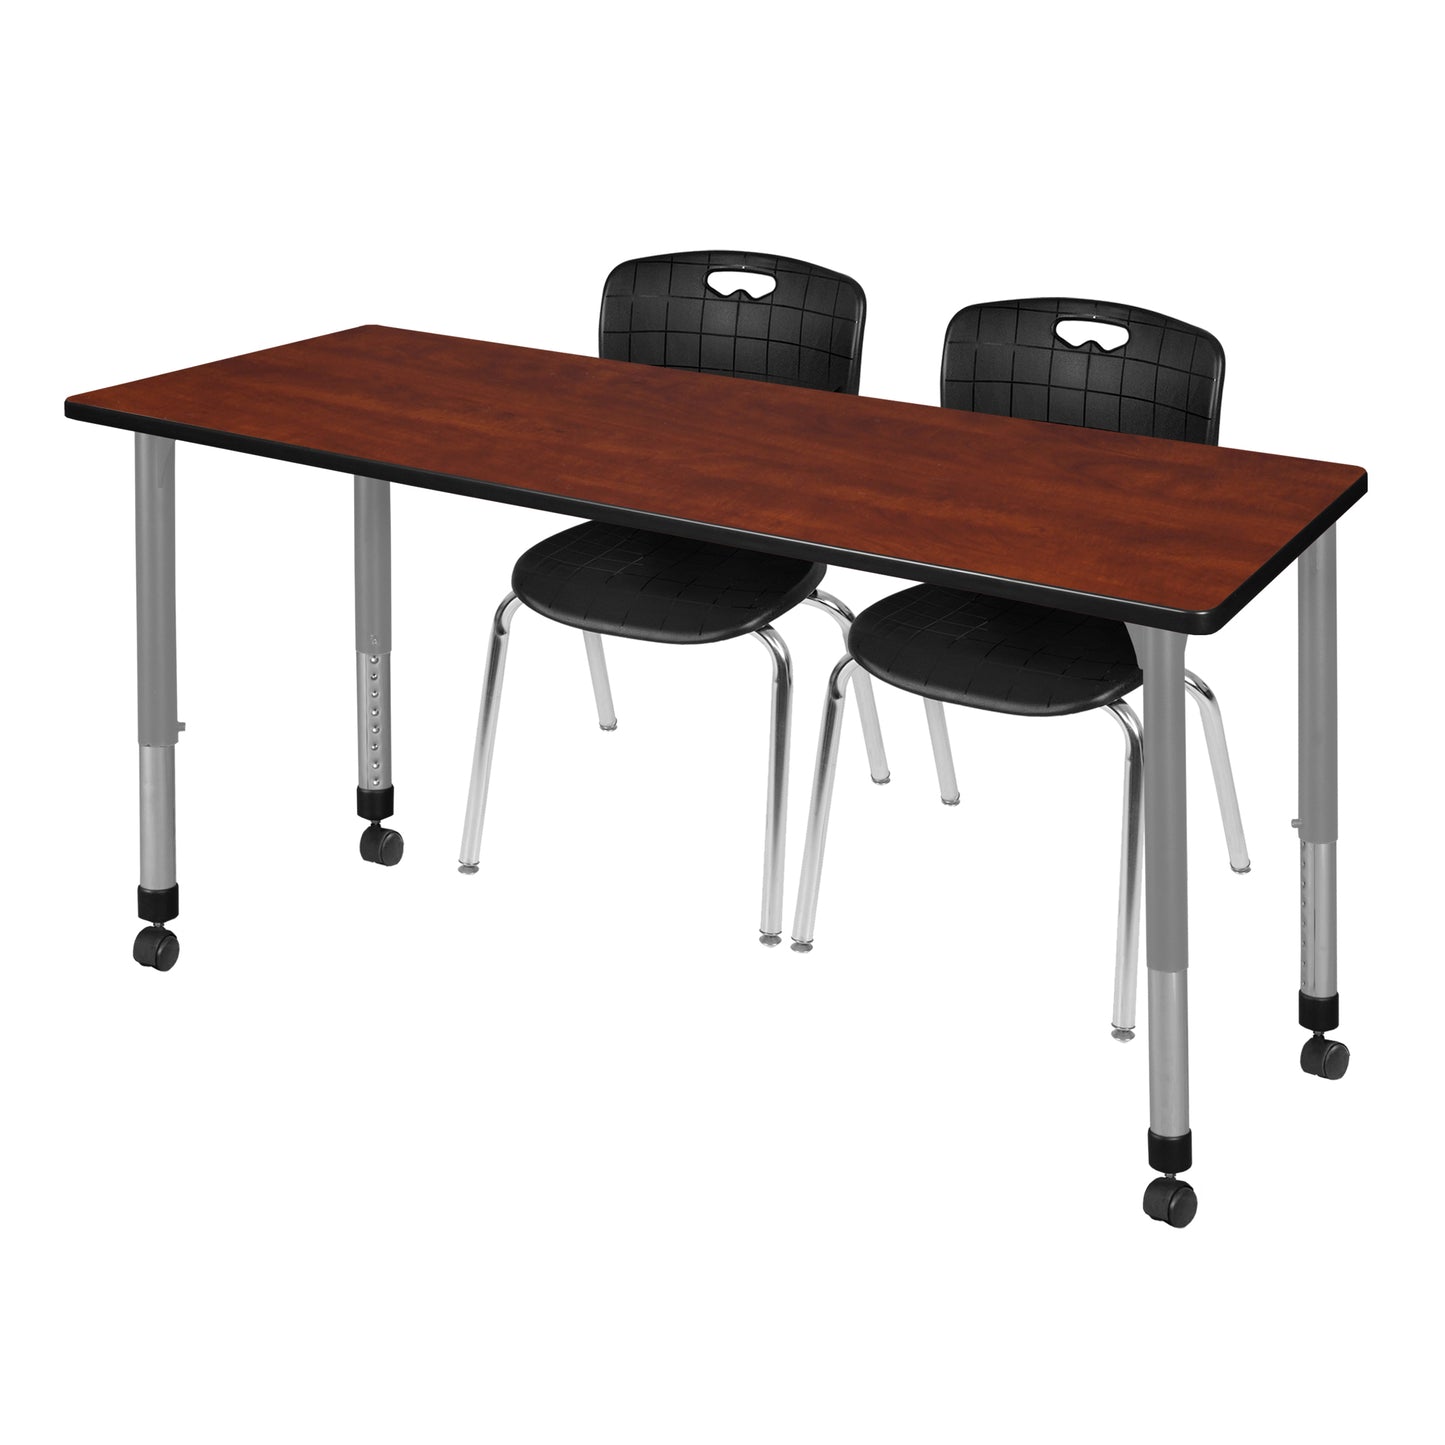 Regency Kee 66 x 30 in. Adjustable Classroom Table & 2 Andy 18 in. Stack Chairs